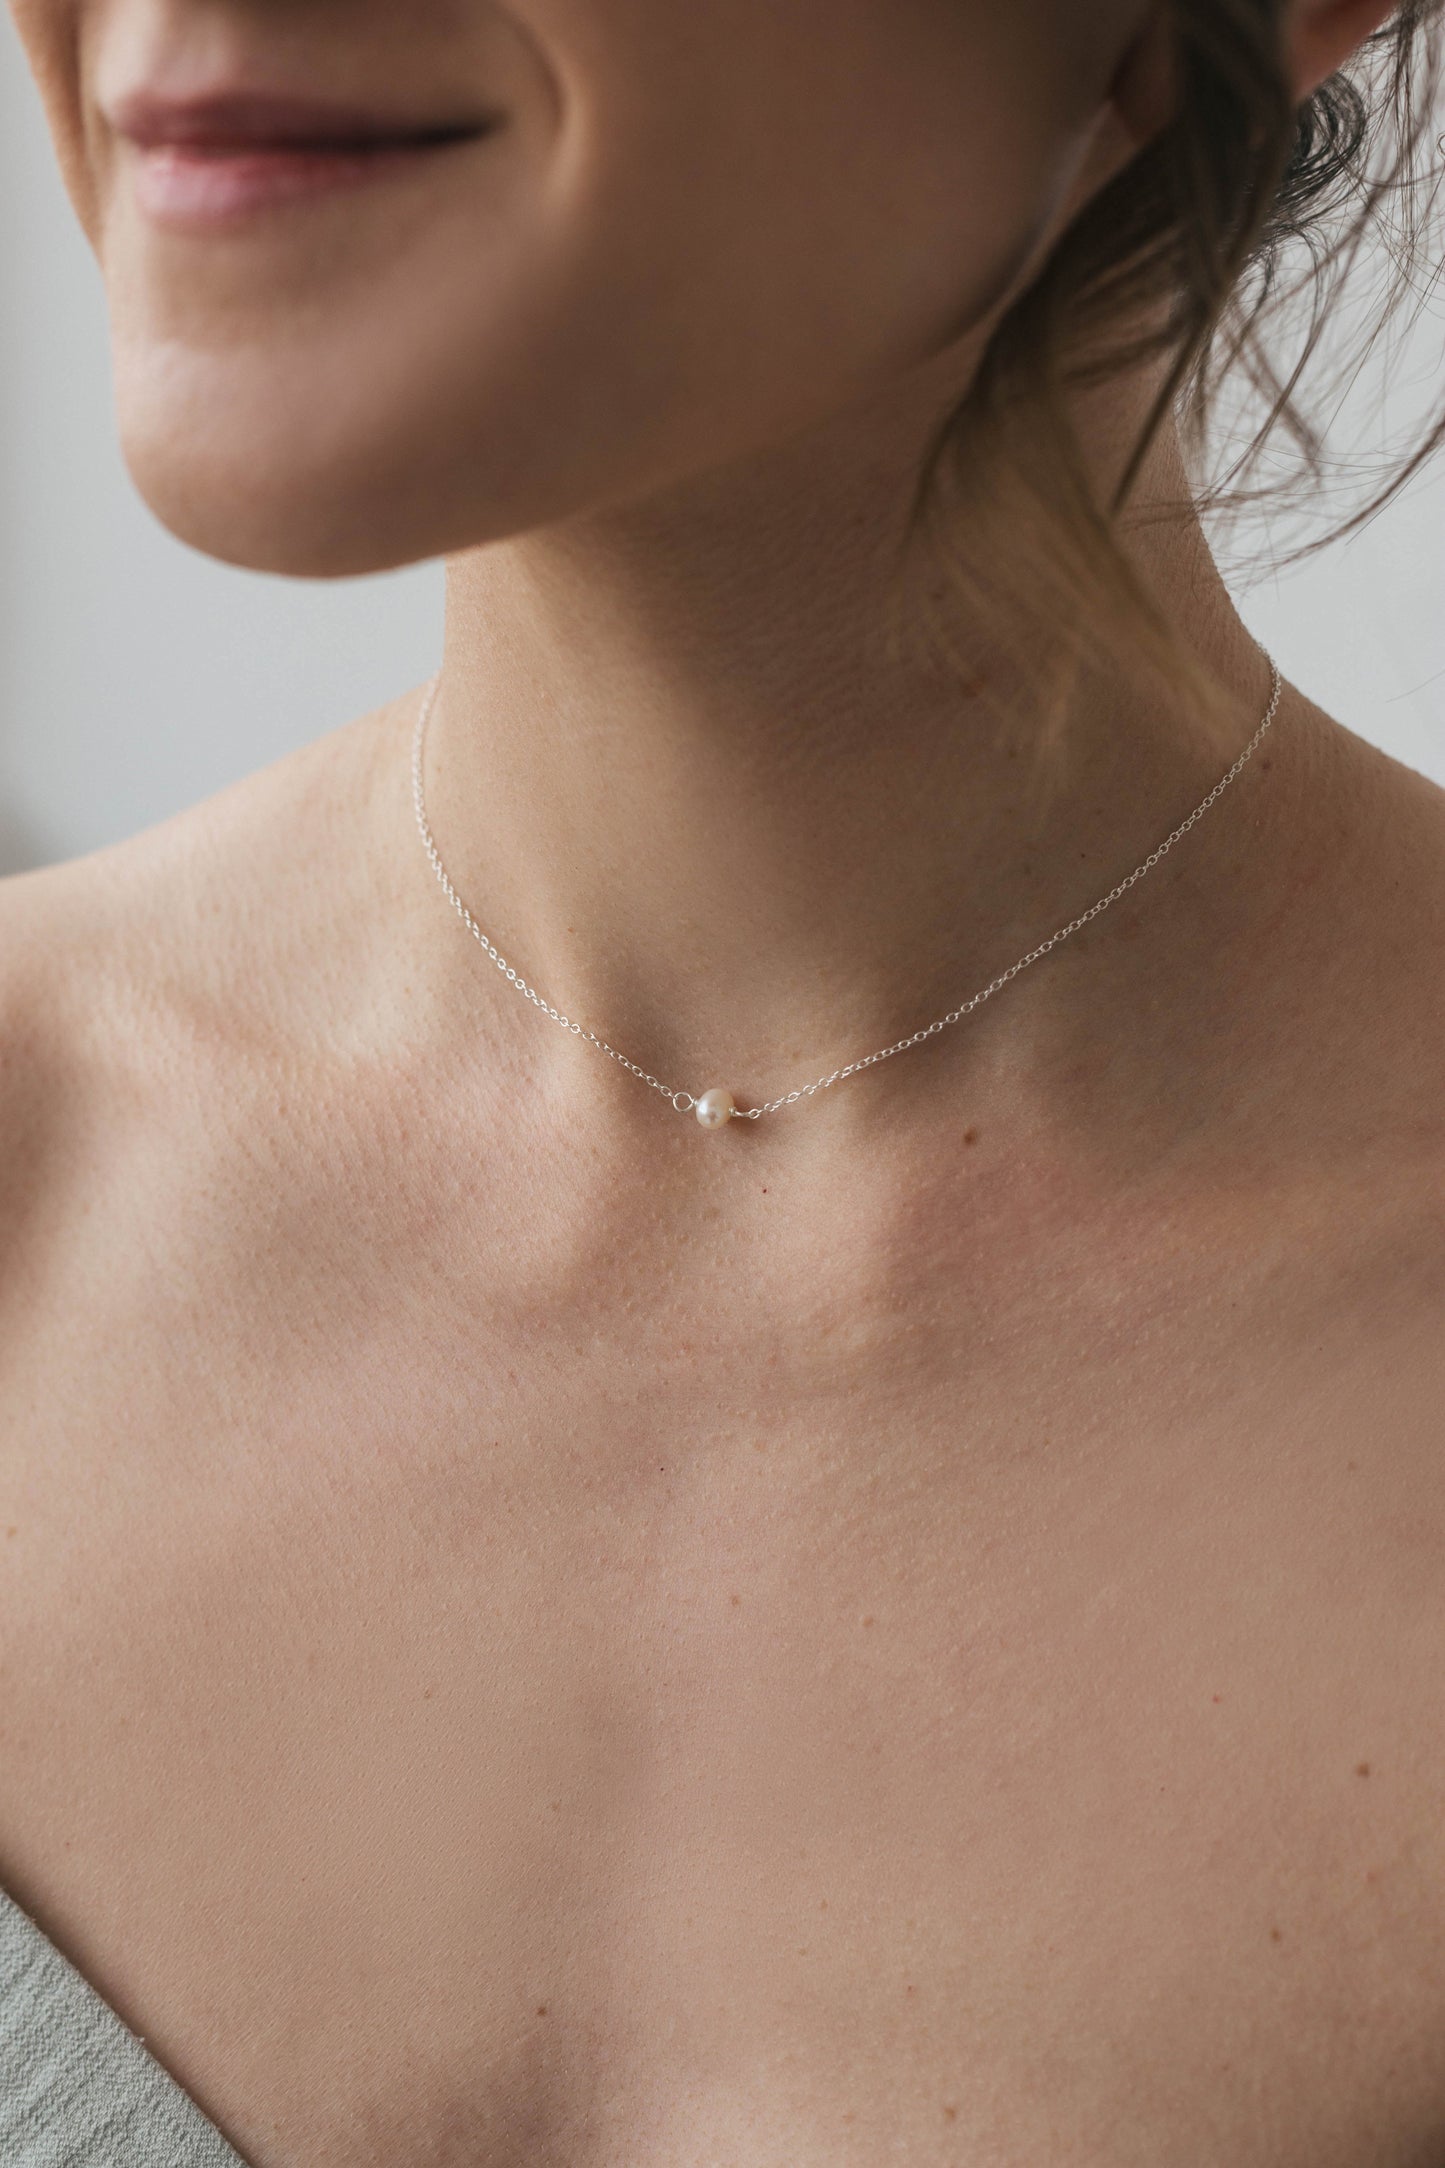 Choker with silver chain and pearl in the middle